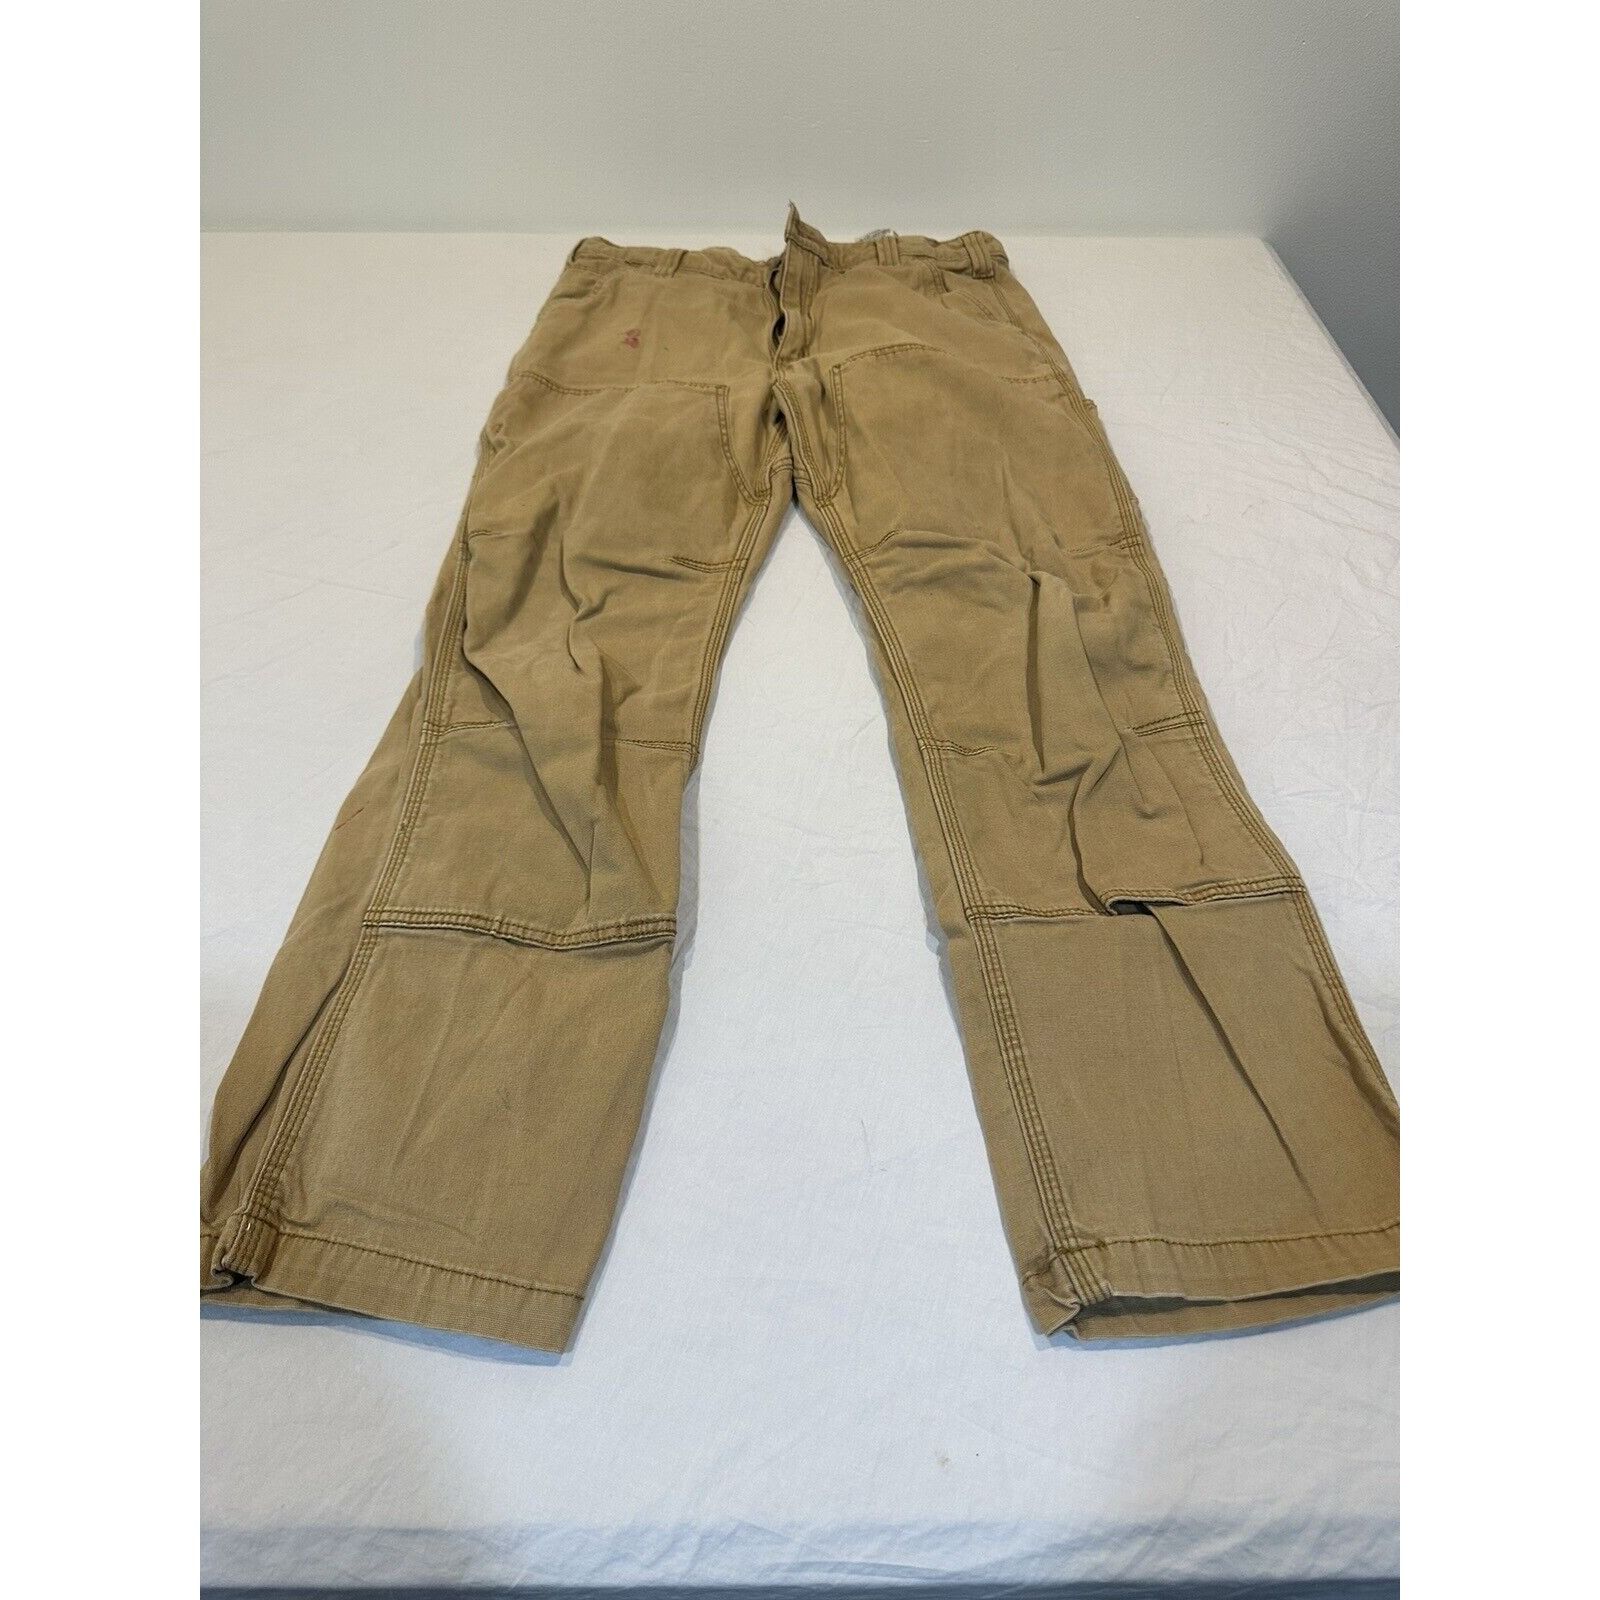 Carhartt Mens Carhartt Pants Relaxed Fit, Size 36x32, Some Paint St